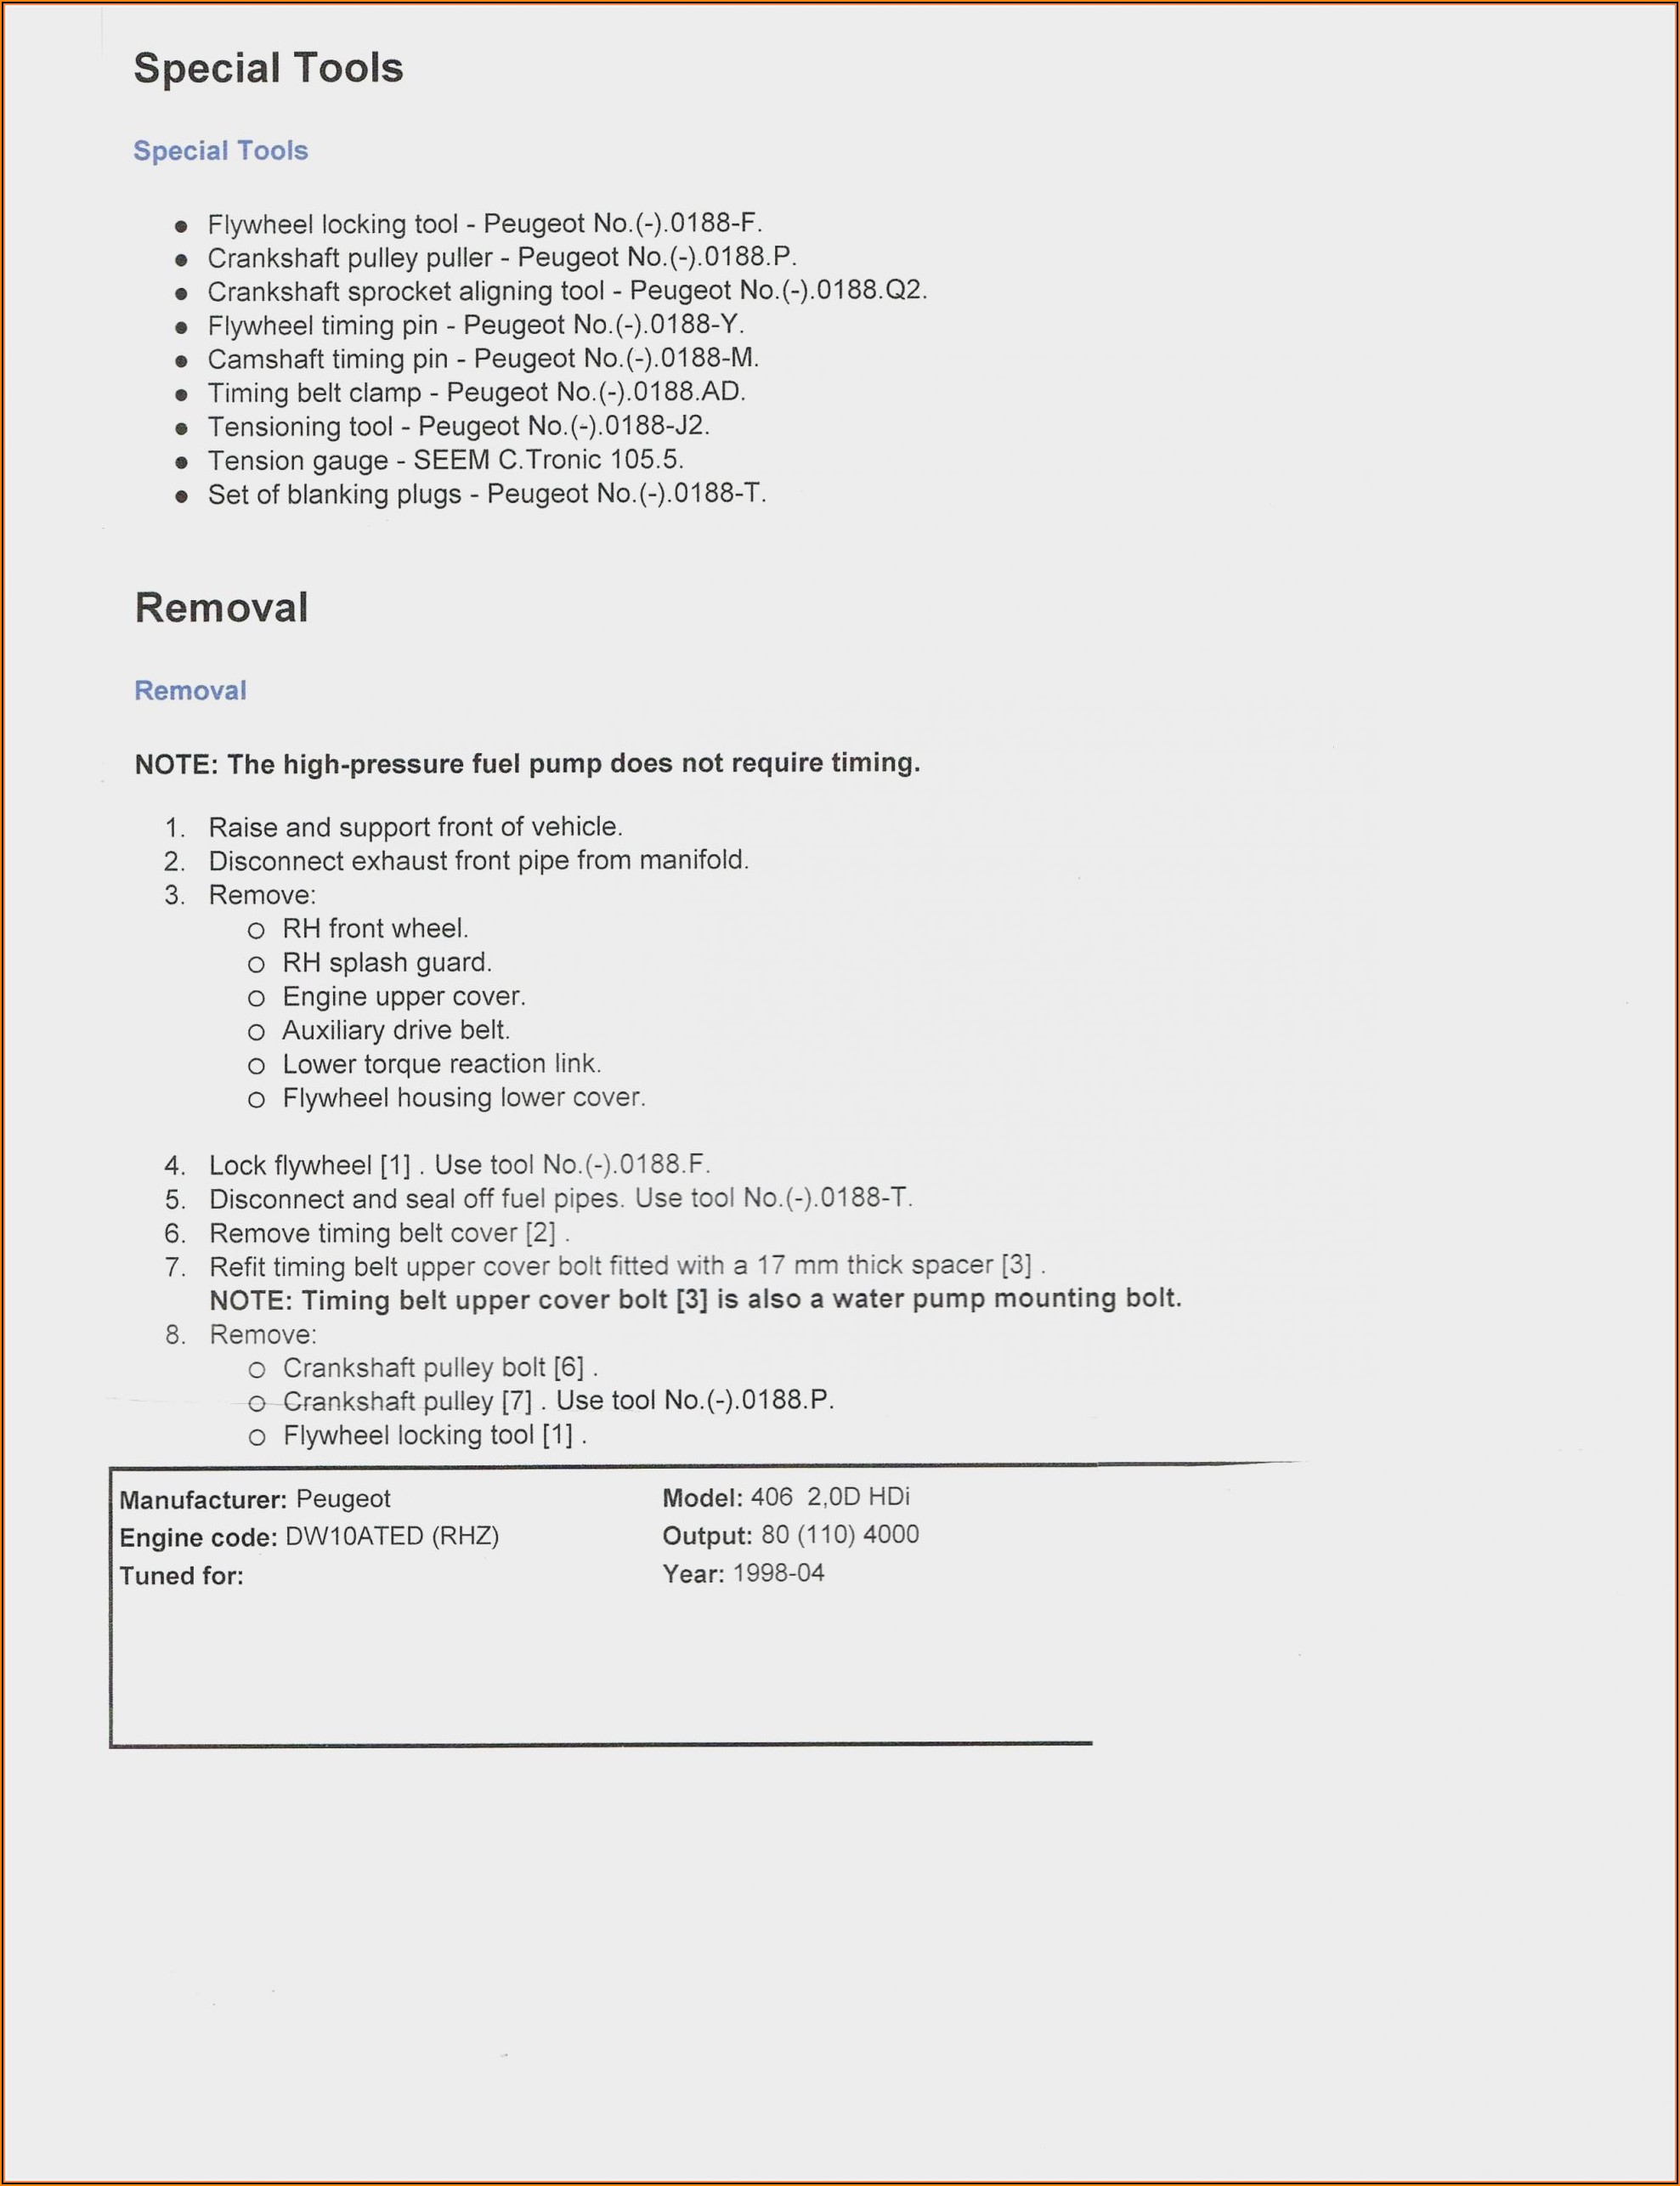 Resume Examples For Nurses With No Experience